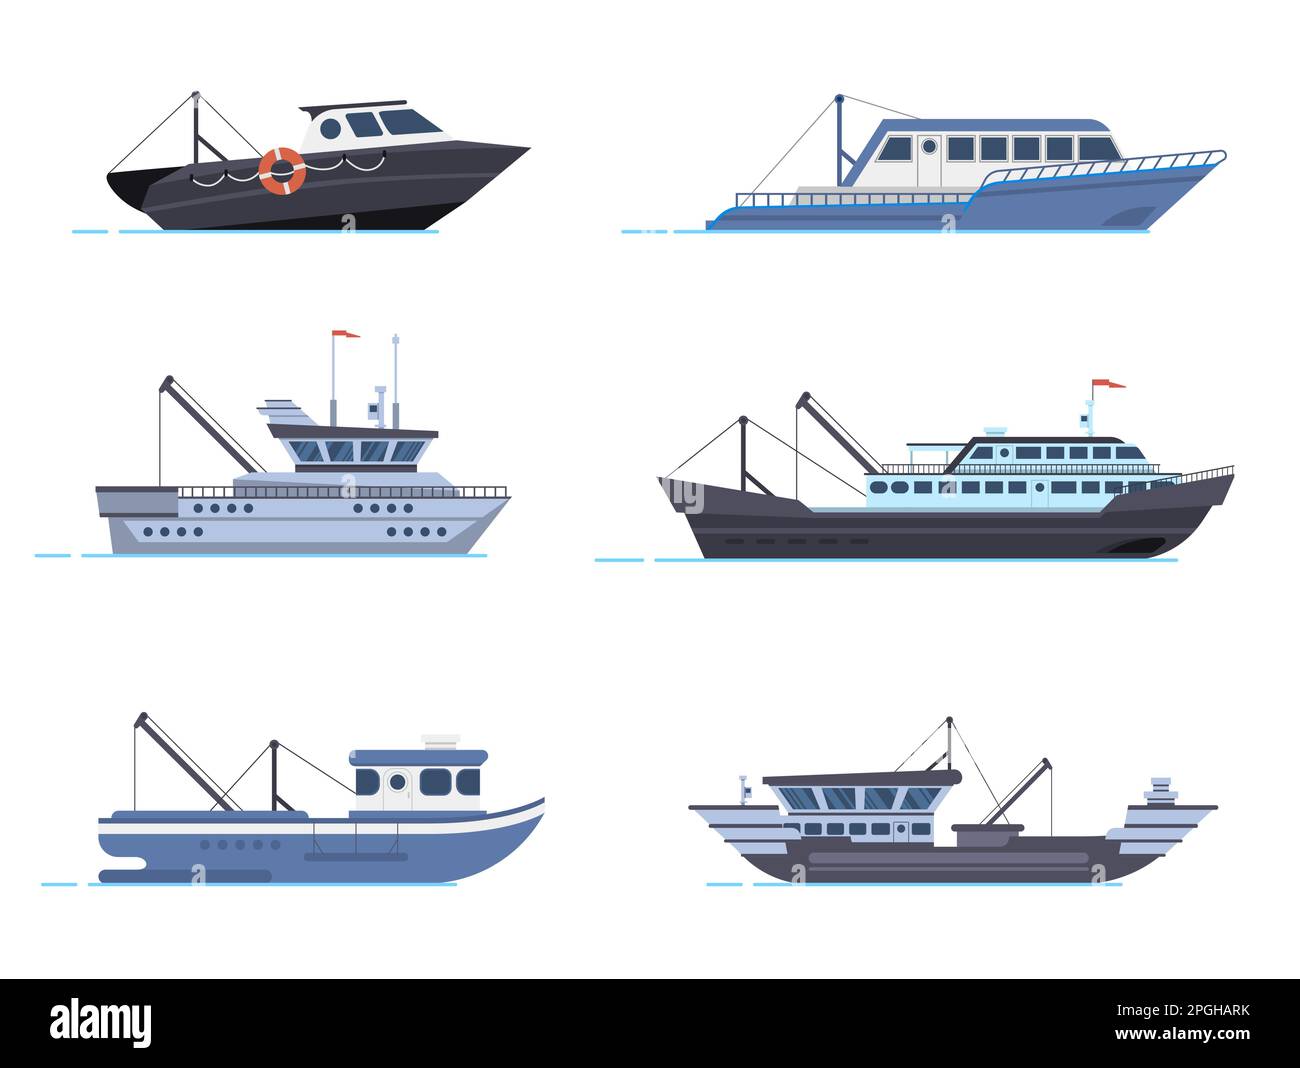 Fisherman boat, commercial vessels. Transportation on sea or ocean. Fish catching transport, water vehicles for logistic Stock Vector